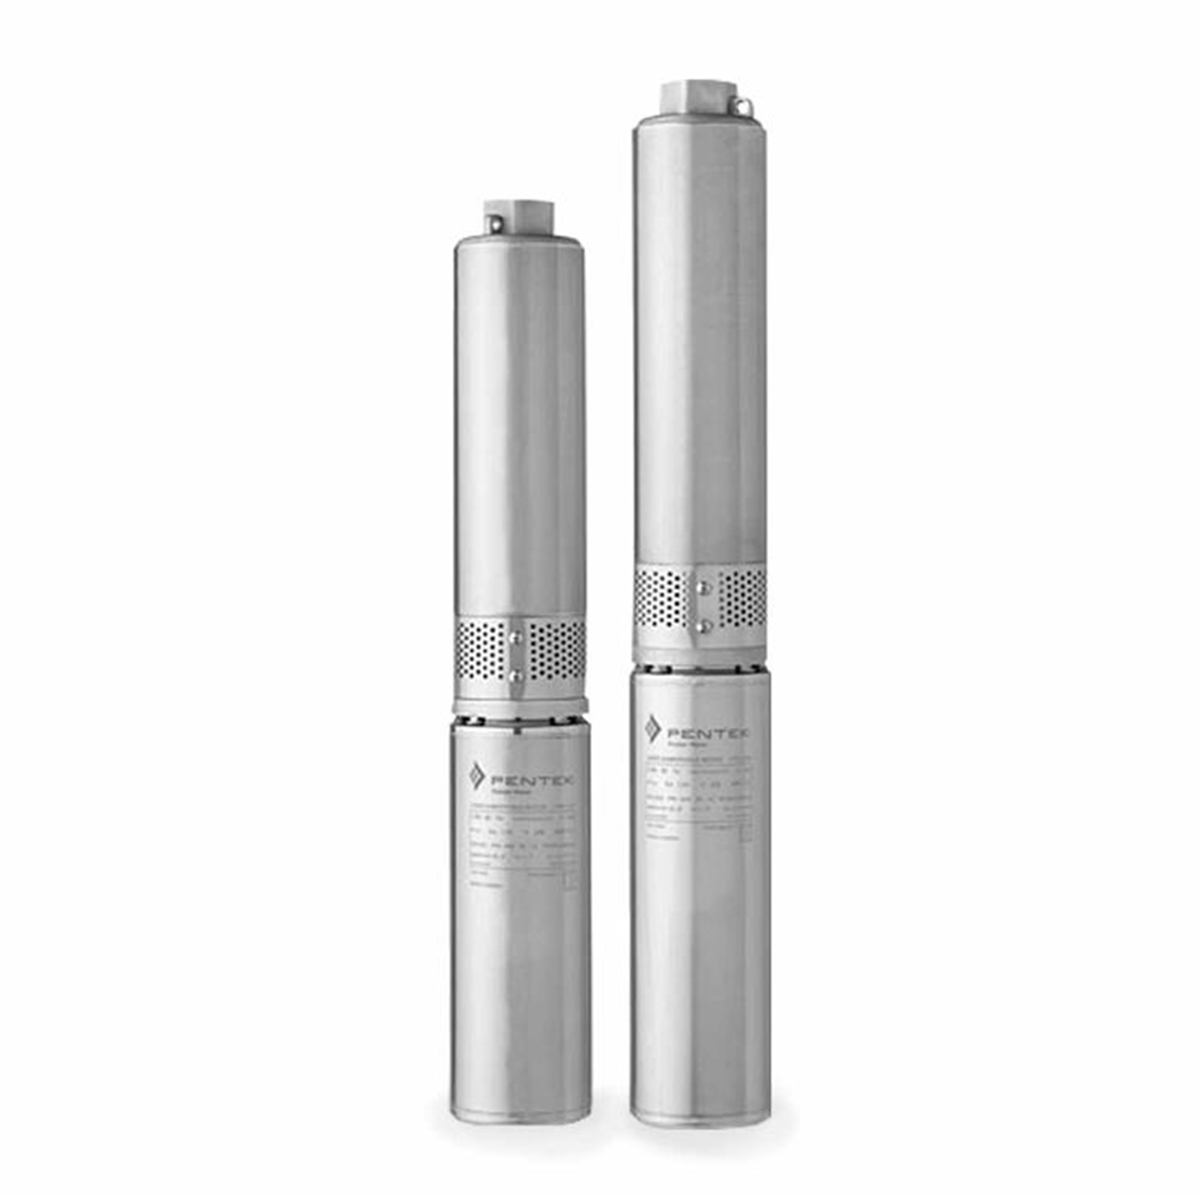 Myers 2ST51-8PLUS-P4 Submersible Stainless Steel Pump 2-Wire 1PH